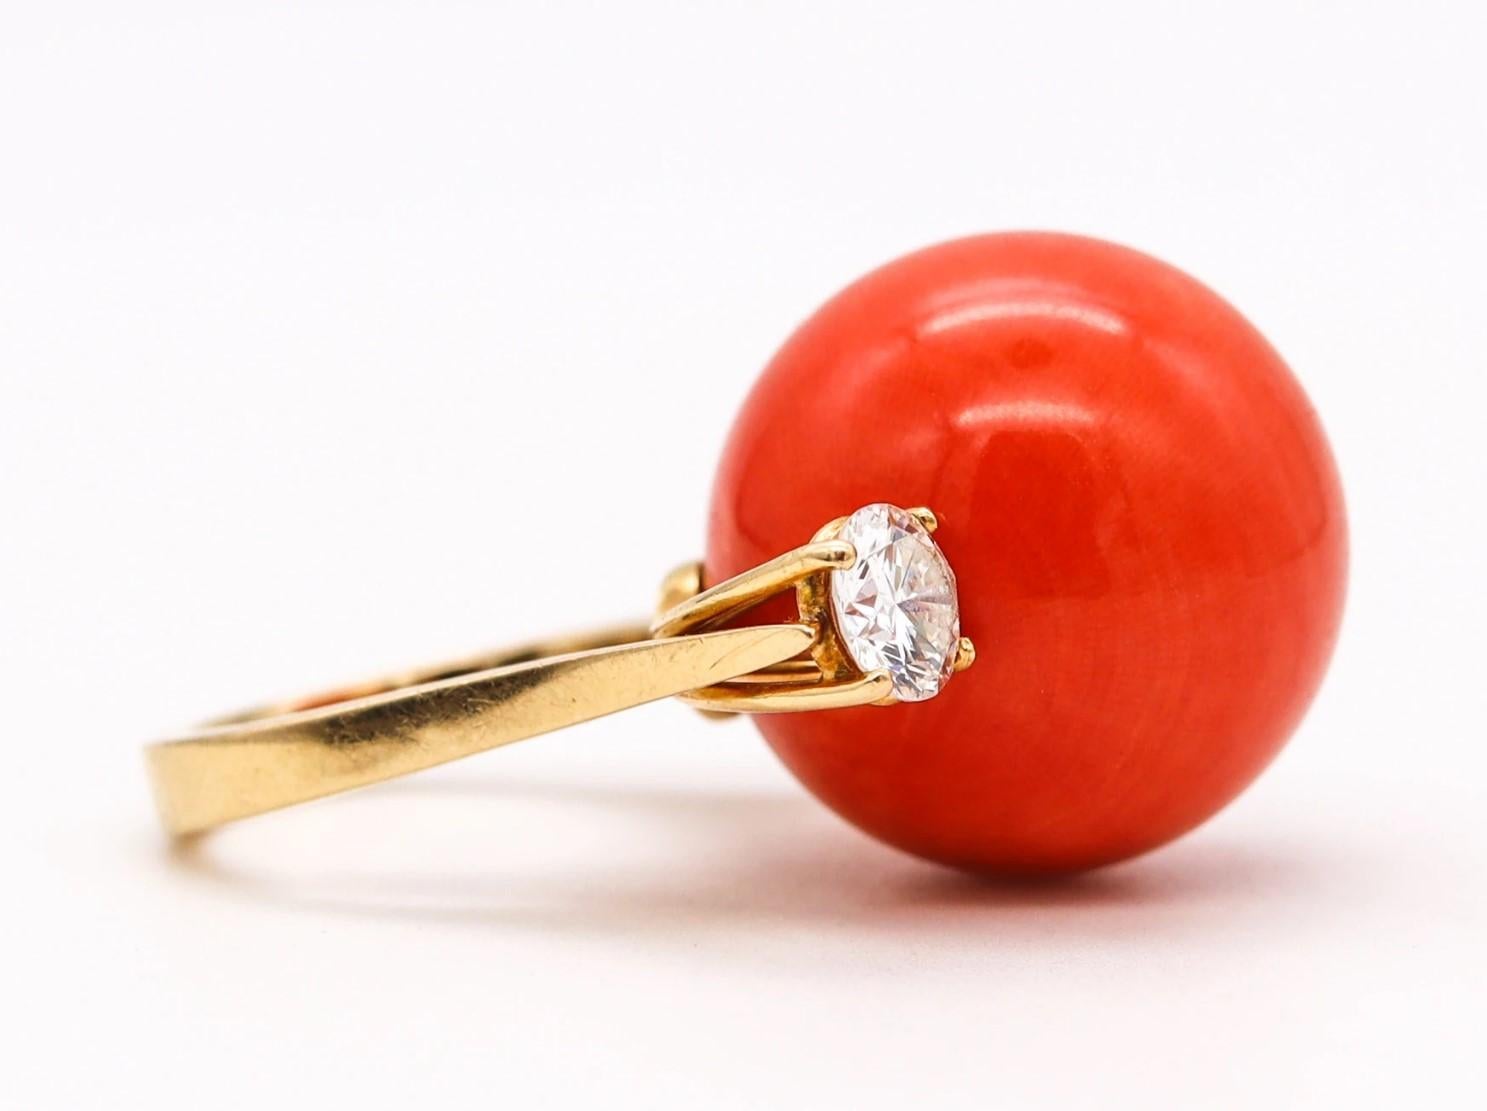 Mixed Cut Italian 1970 Retro-Modernist Cocktail Ring 18Kt Gold 27.17 Ctw Diamonds & Coral